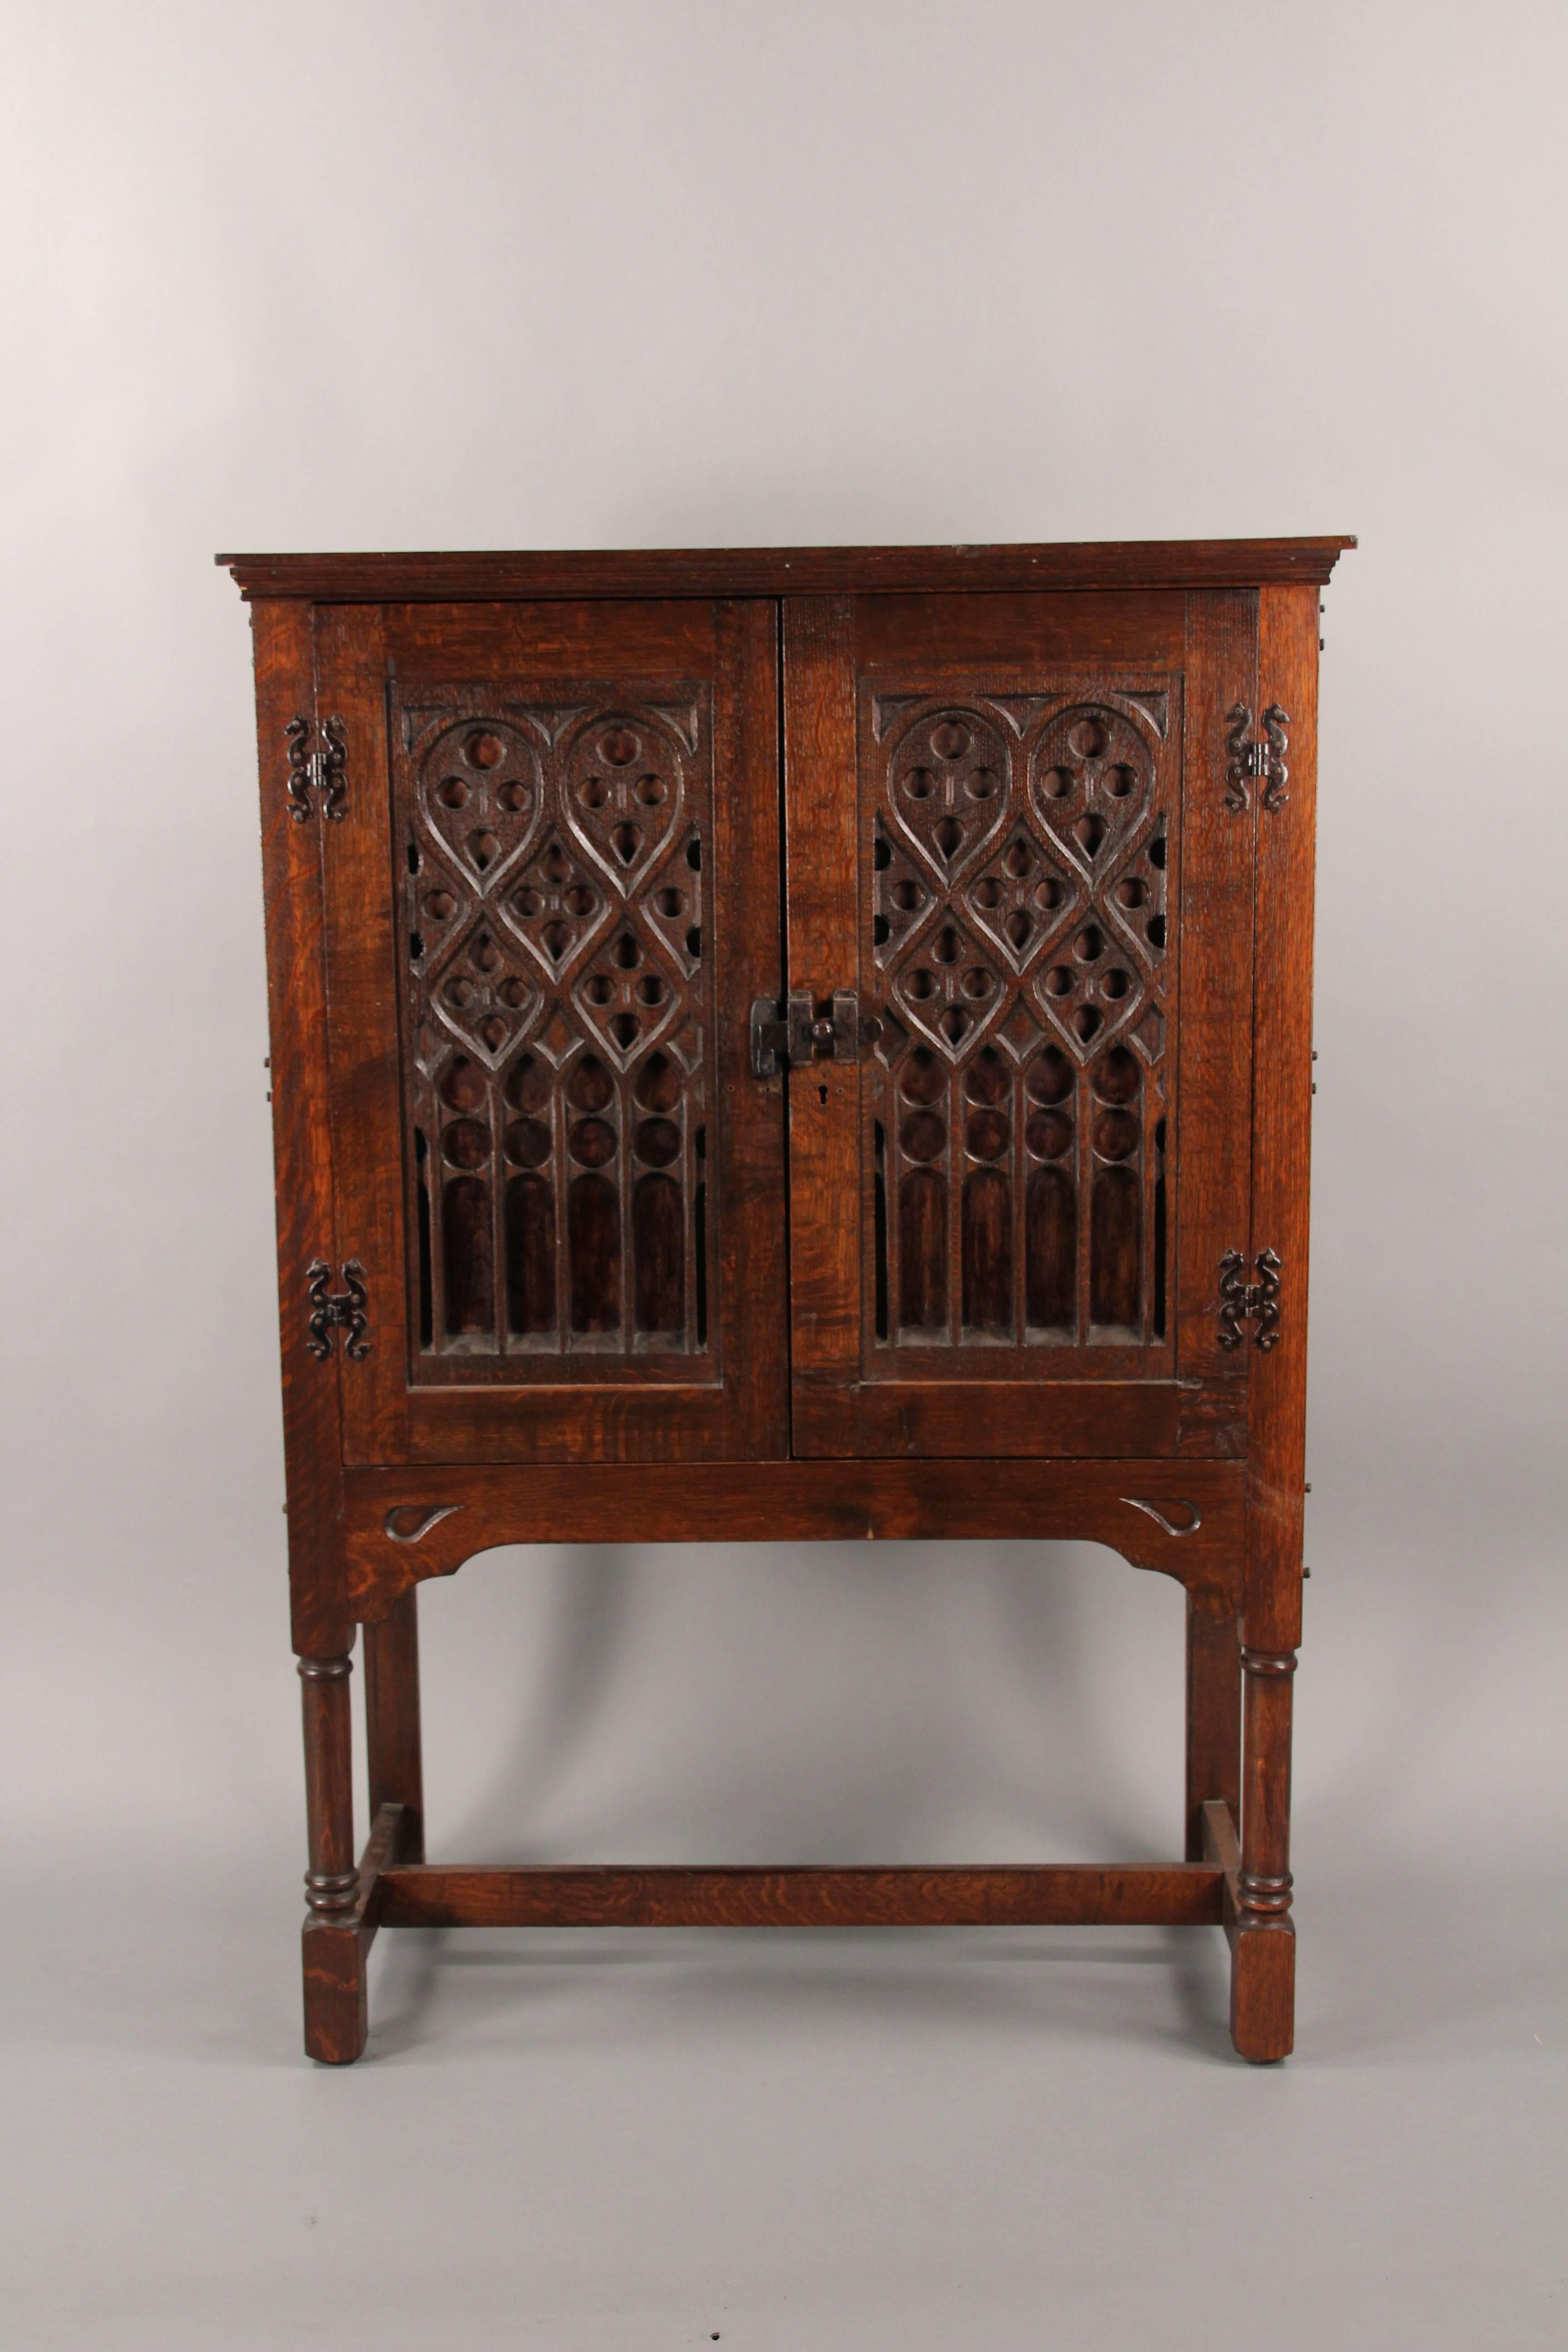 Carved cabinet with two-door and iron hardware, circa 1920s.